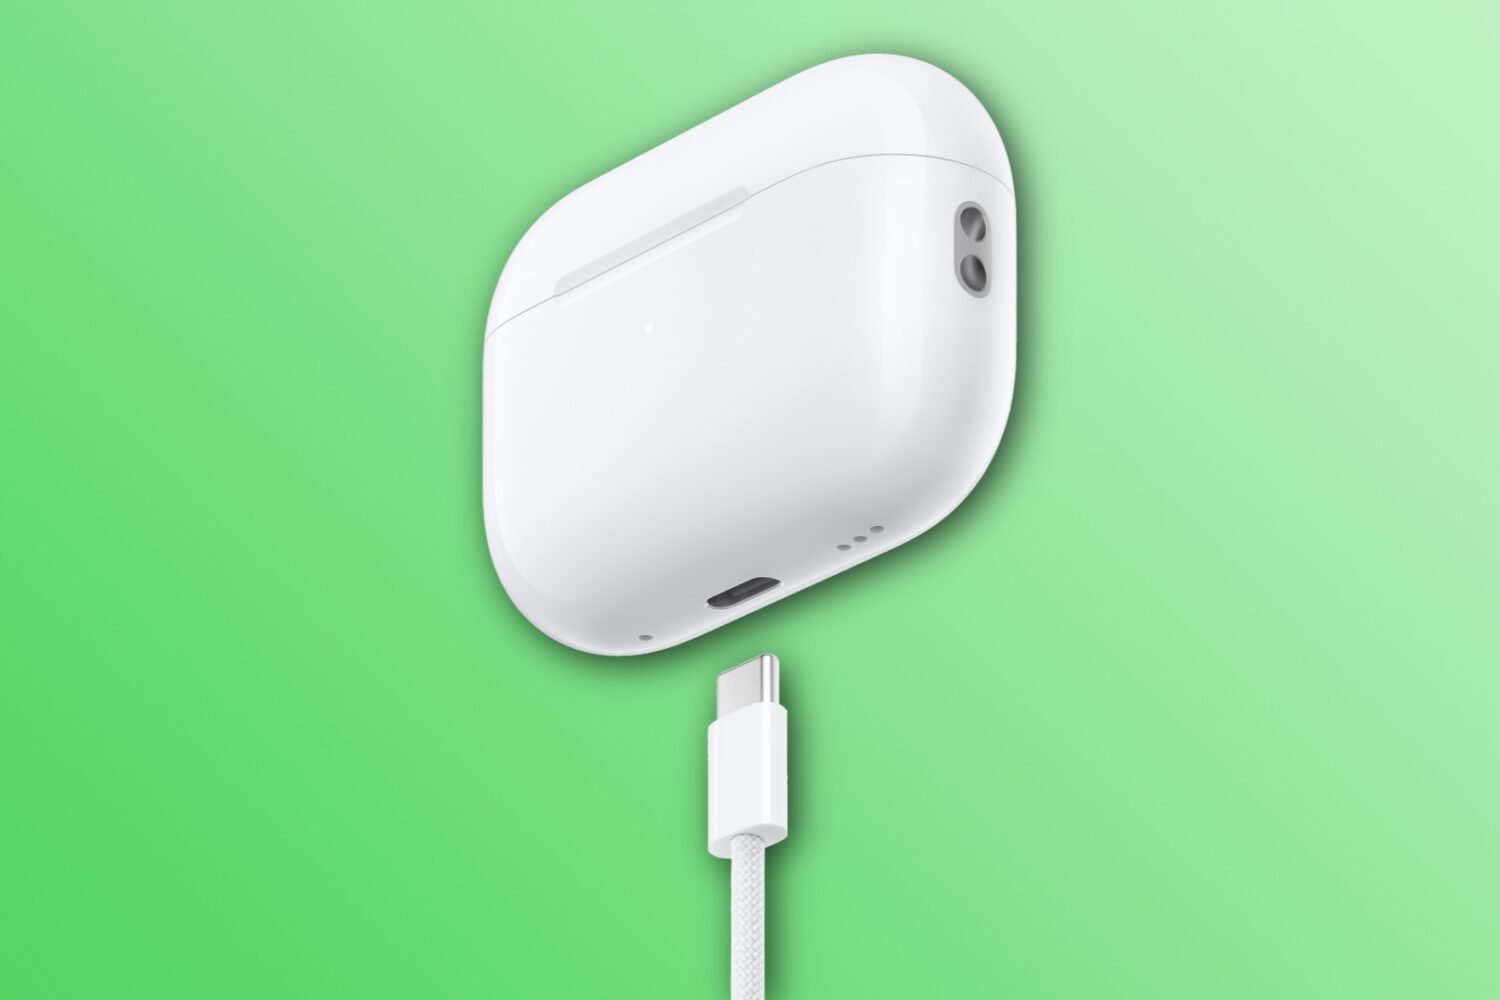 AirPods Pro charging case with a USB-C cable